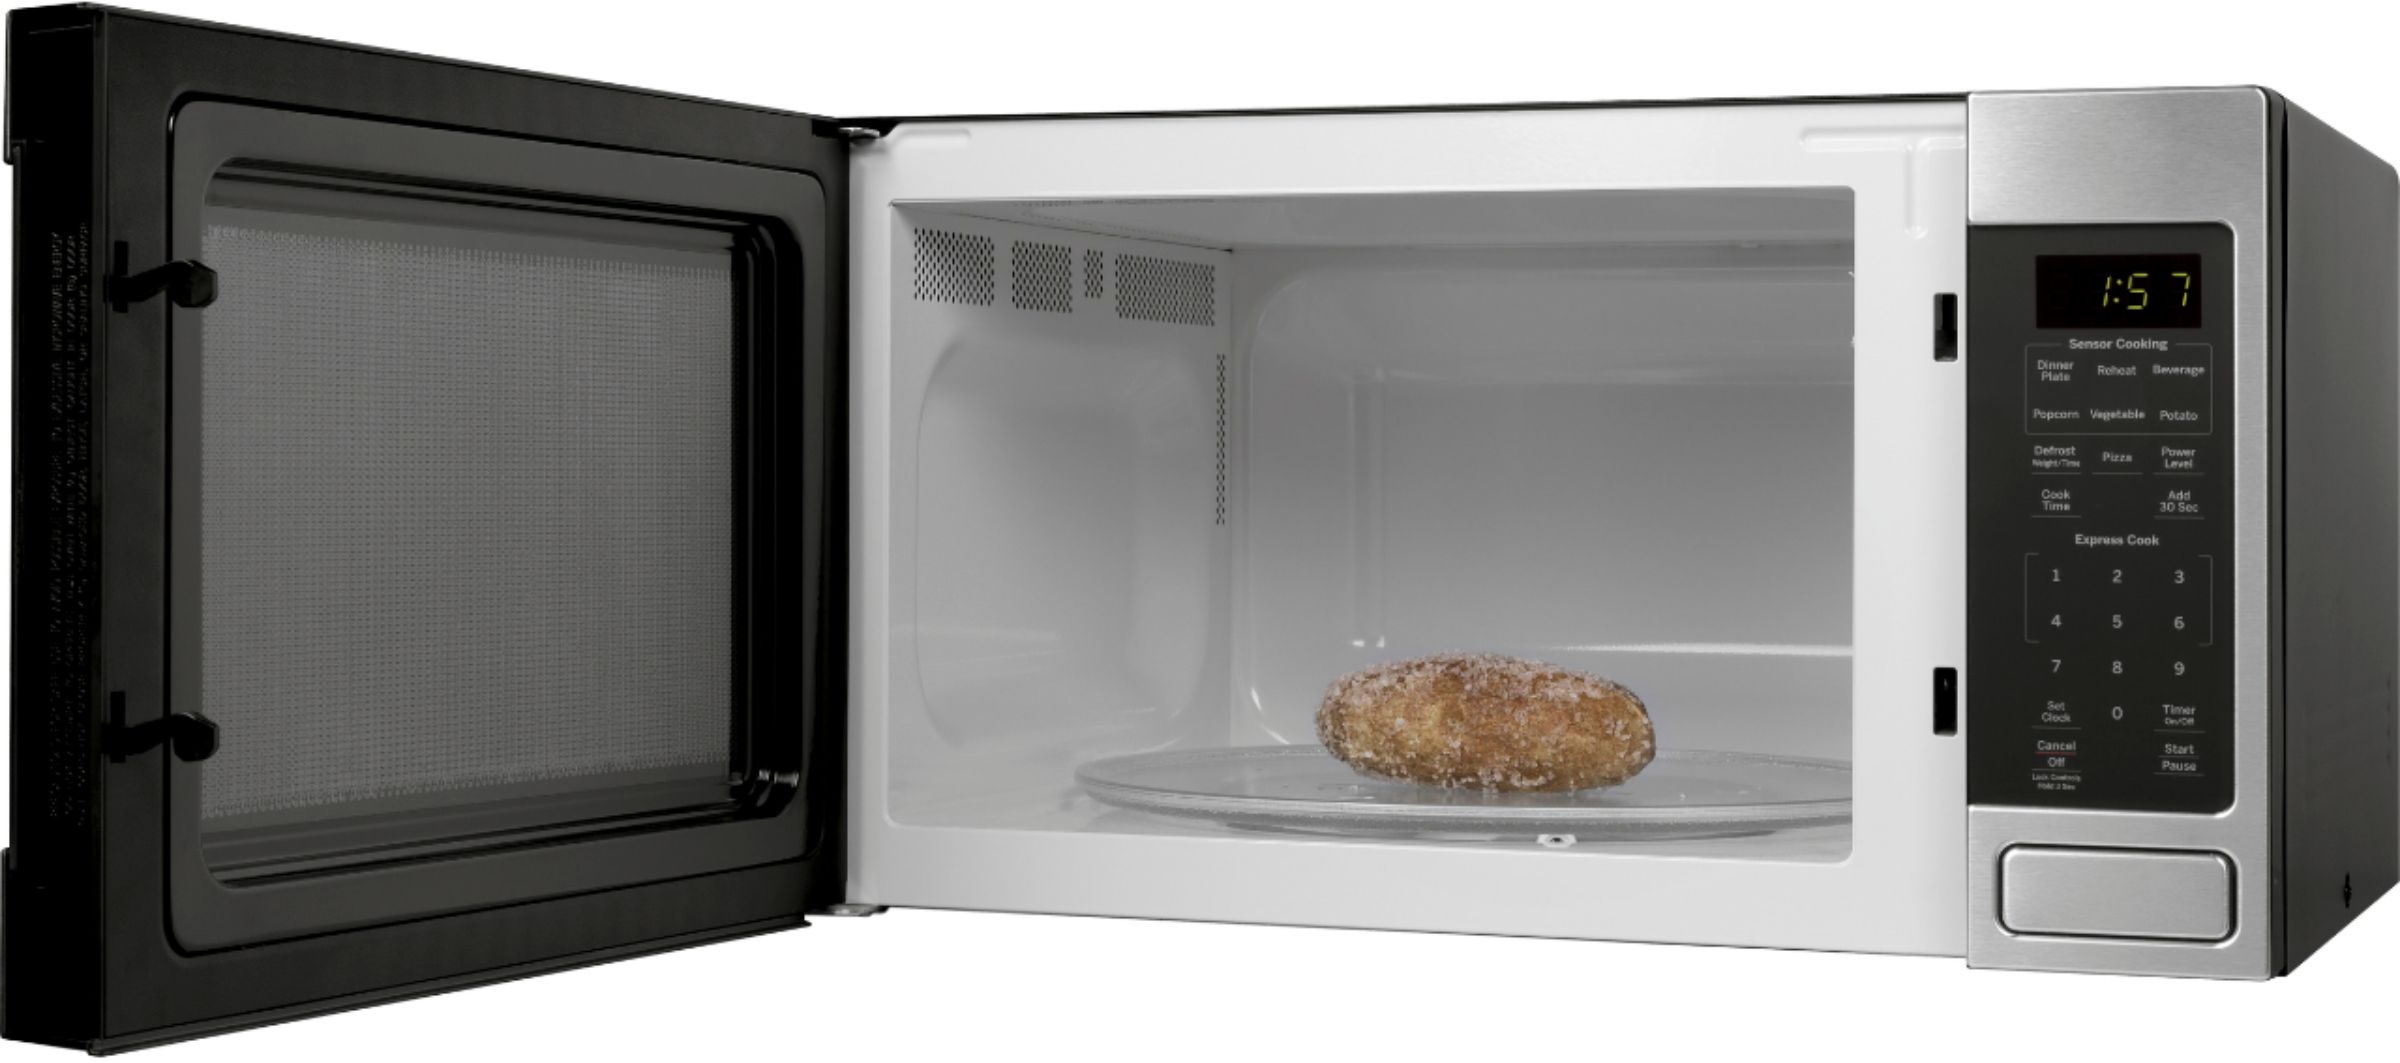 Ge 1 6 Cu Ft Microwave With Sensor Cooking Stainless Steel